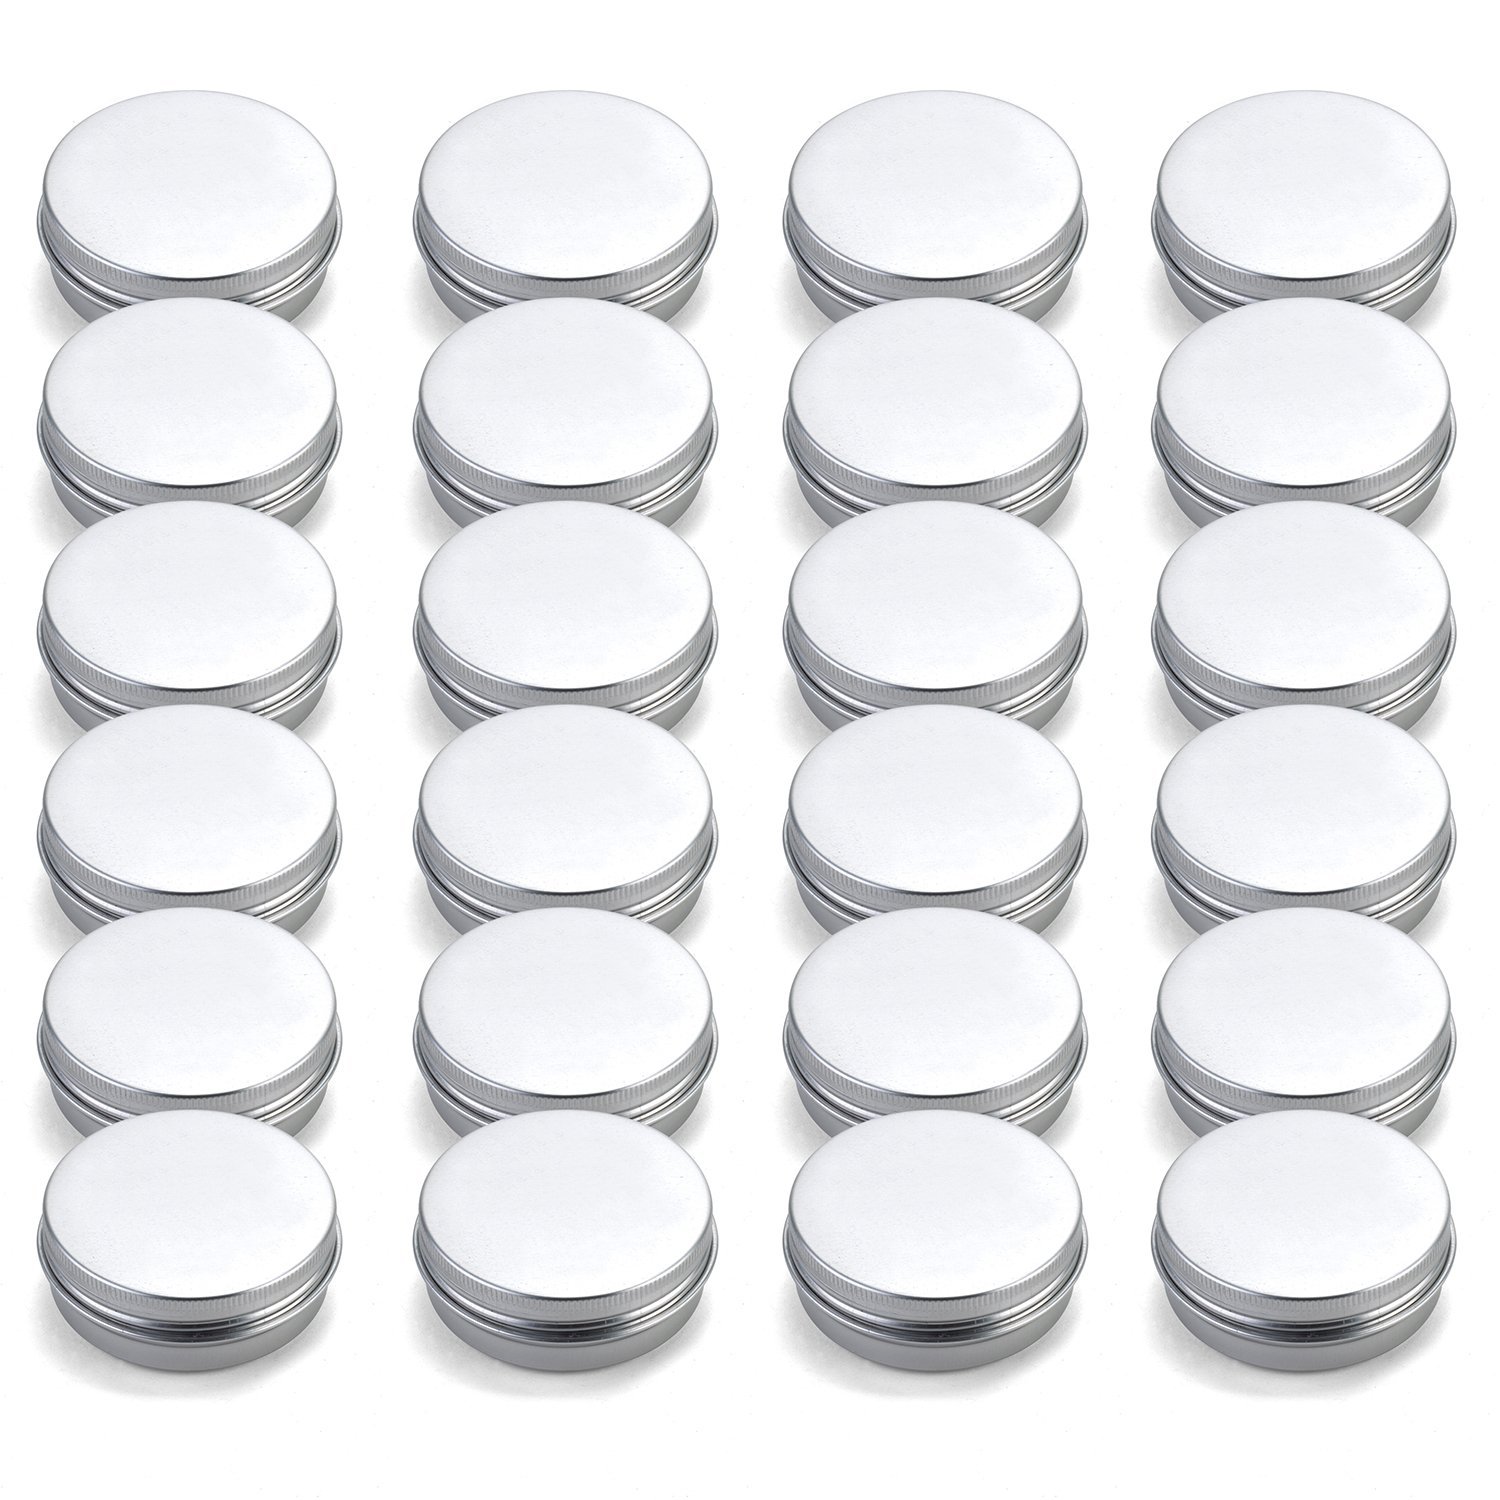 Tosnail 24 Pack 2 oz. Aluminum Round Lip Balm Tin Containers with Screw Thread Lid - Great for Spices, Candies, Tea or Gift Giving